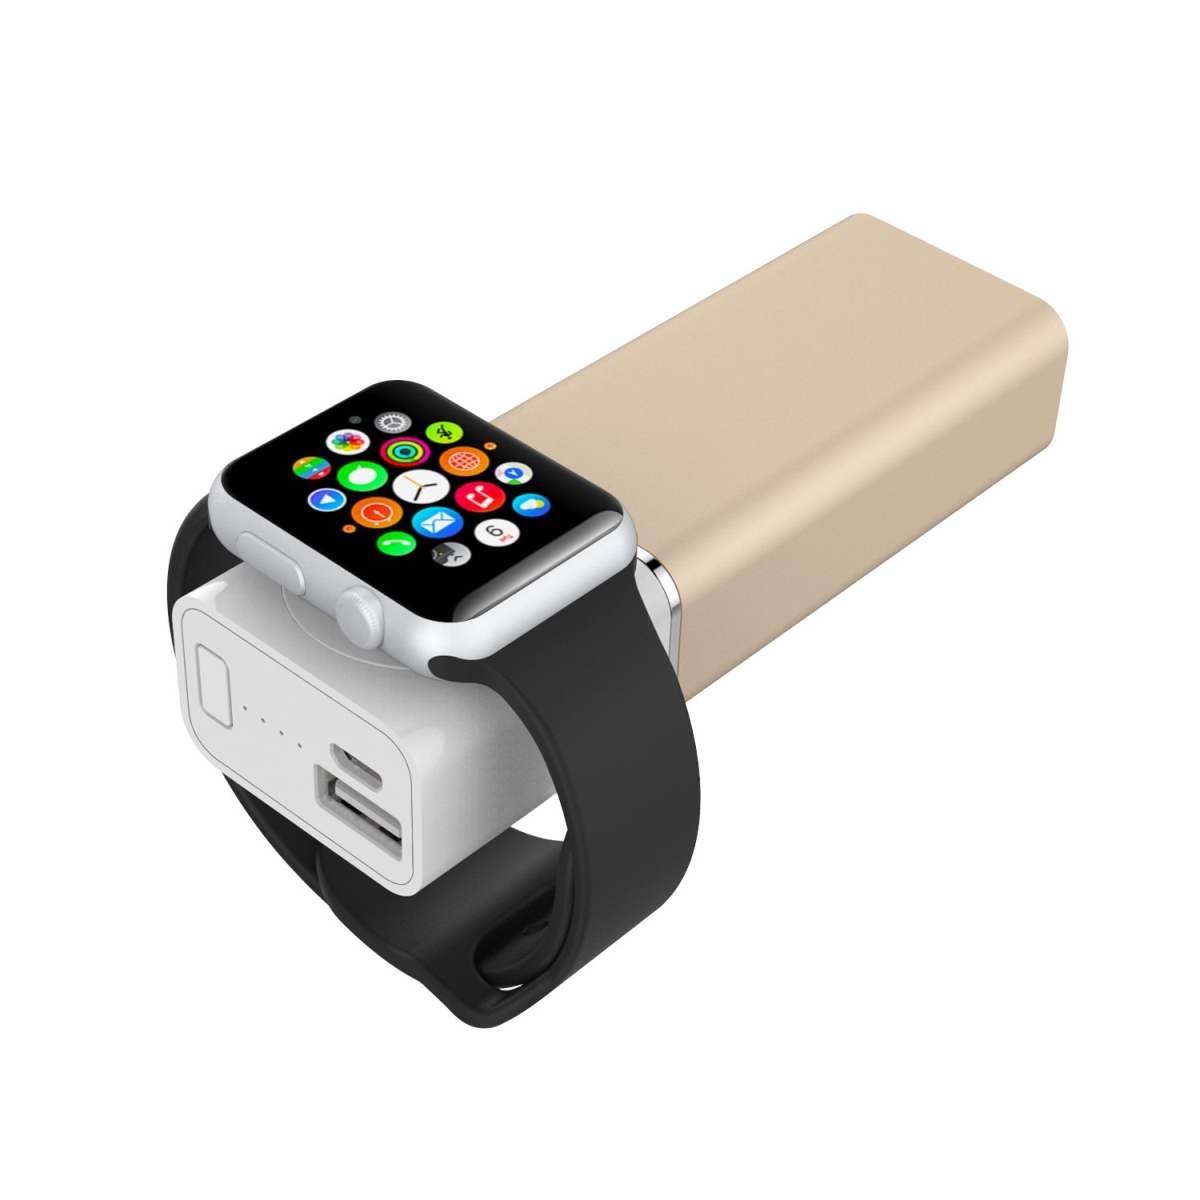 Ew-awpb2-gd Power Bank For Apple Watch - Gold